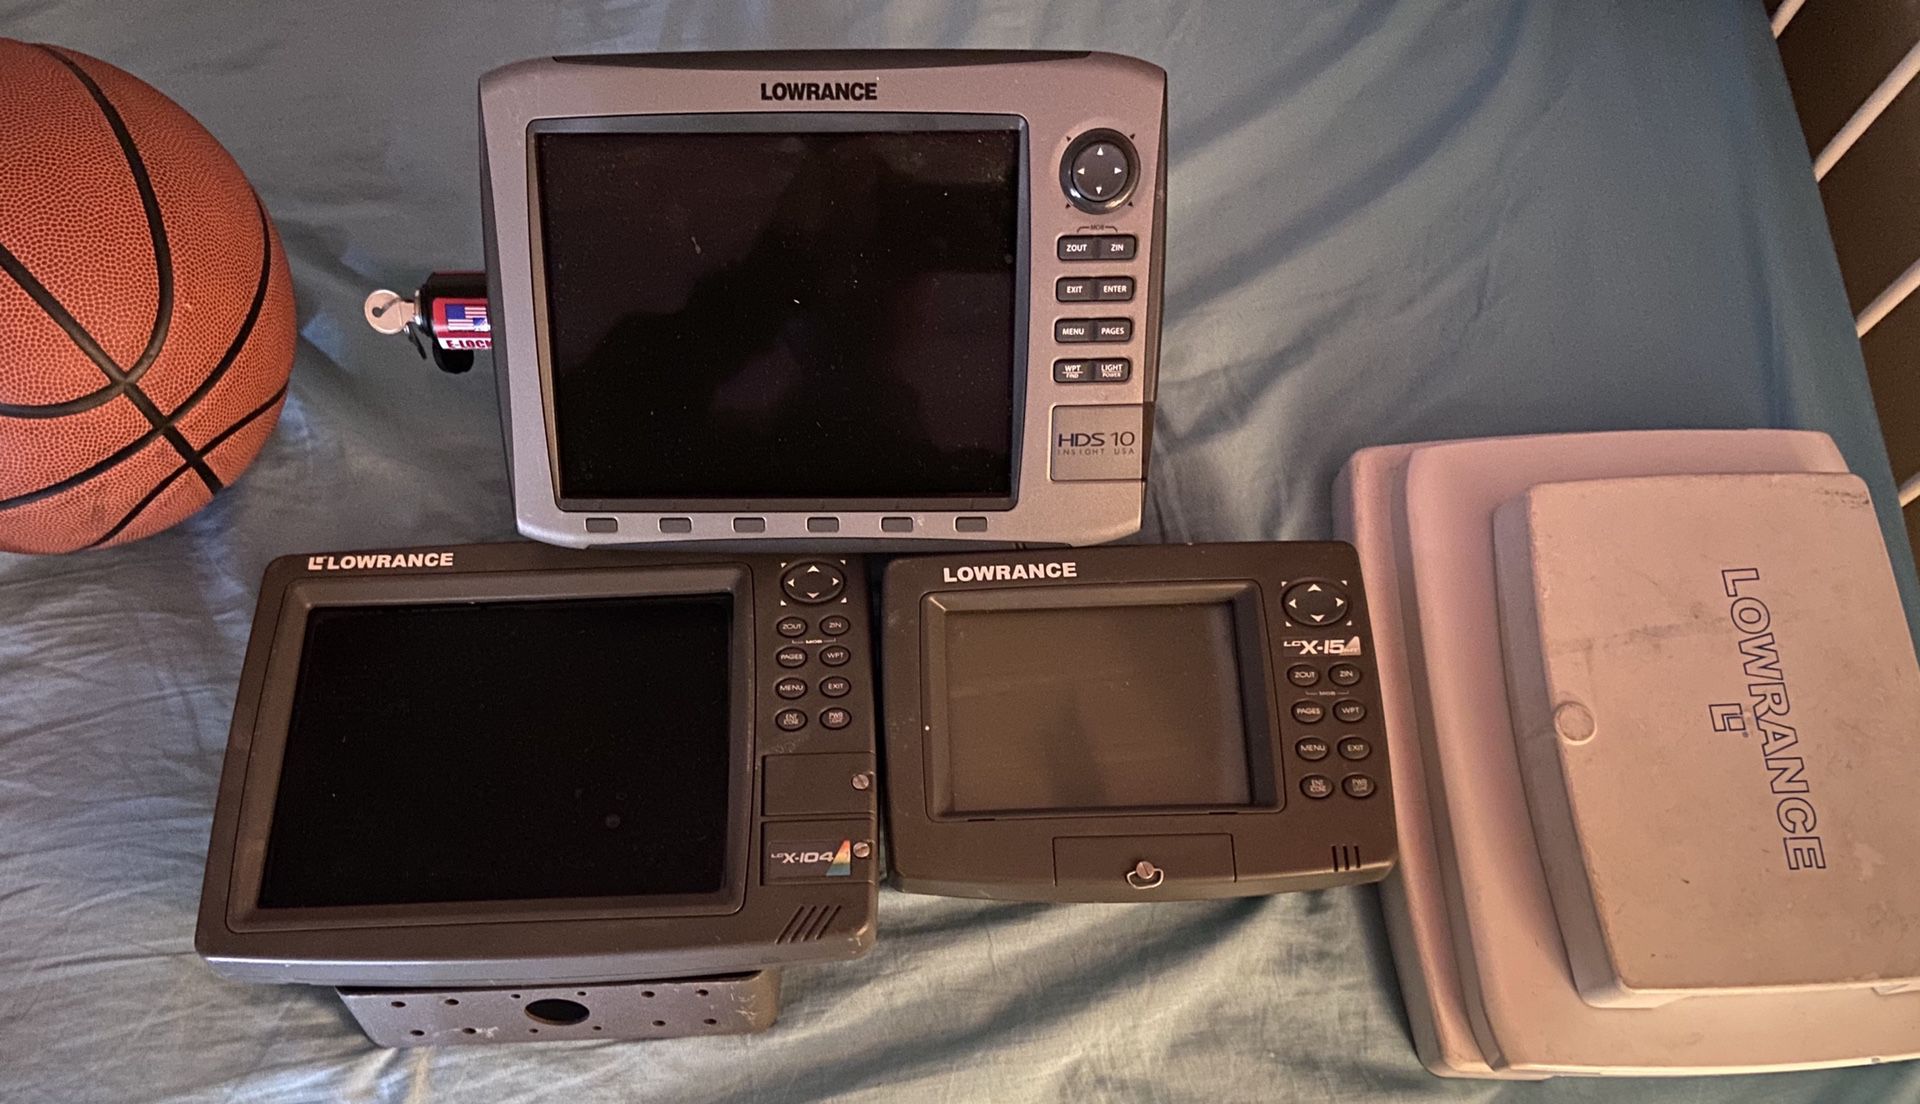 Lowrance Fish finder lot